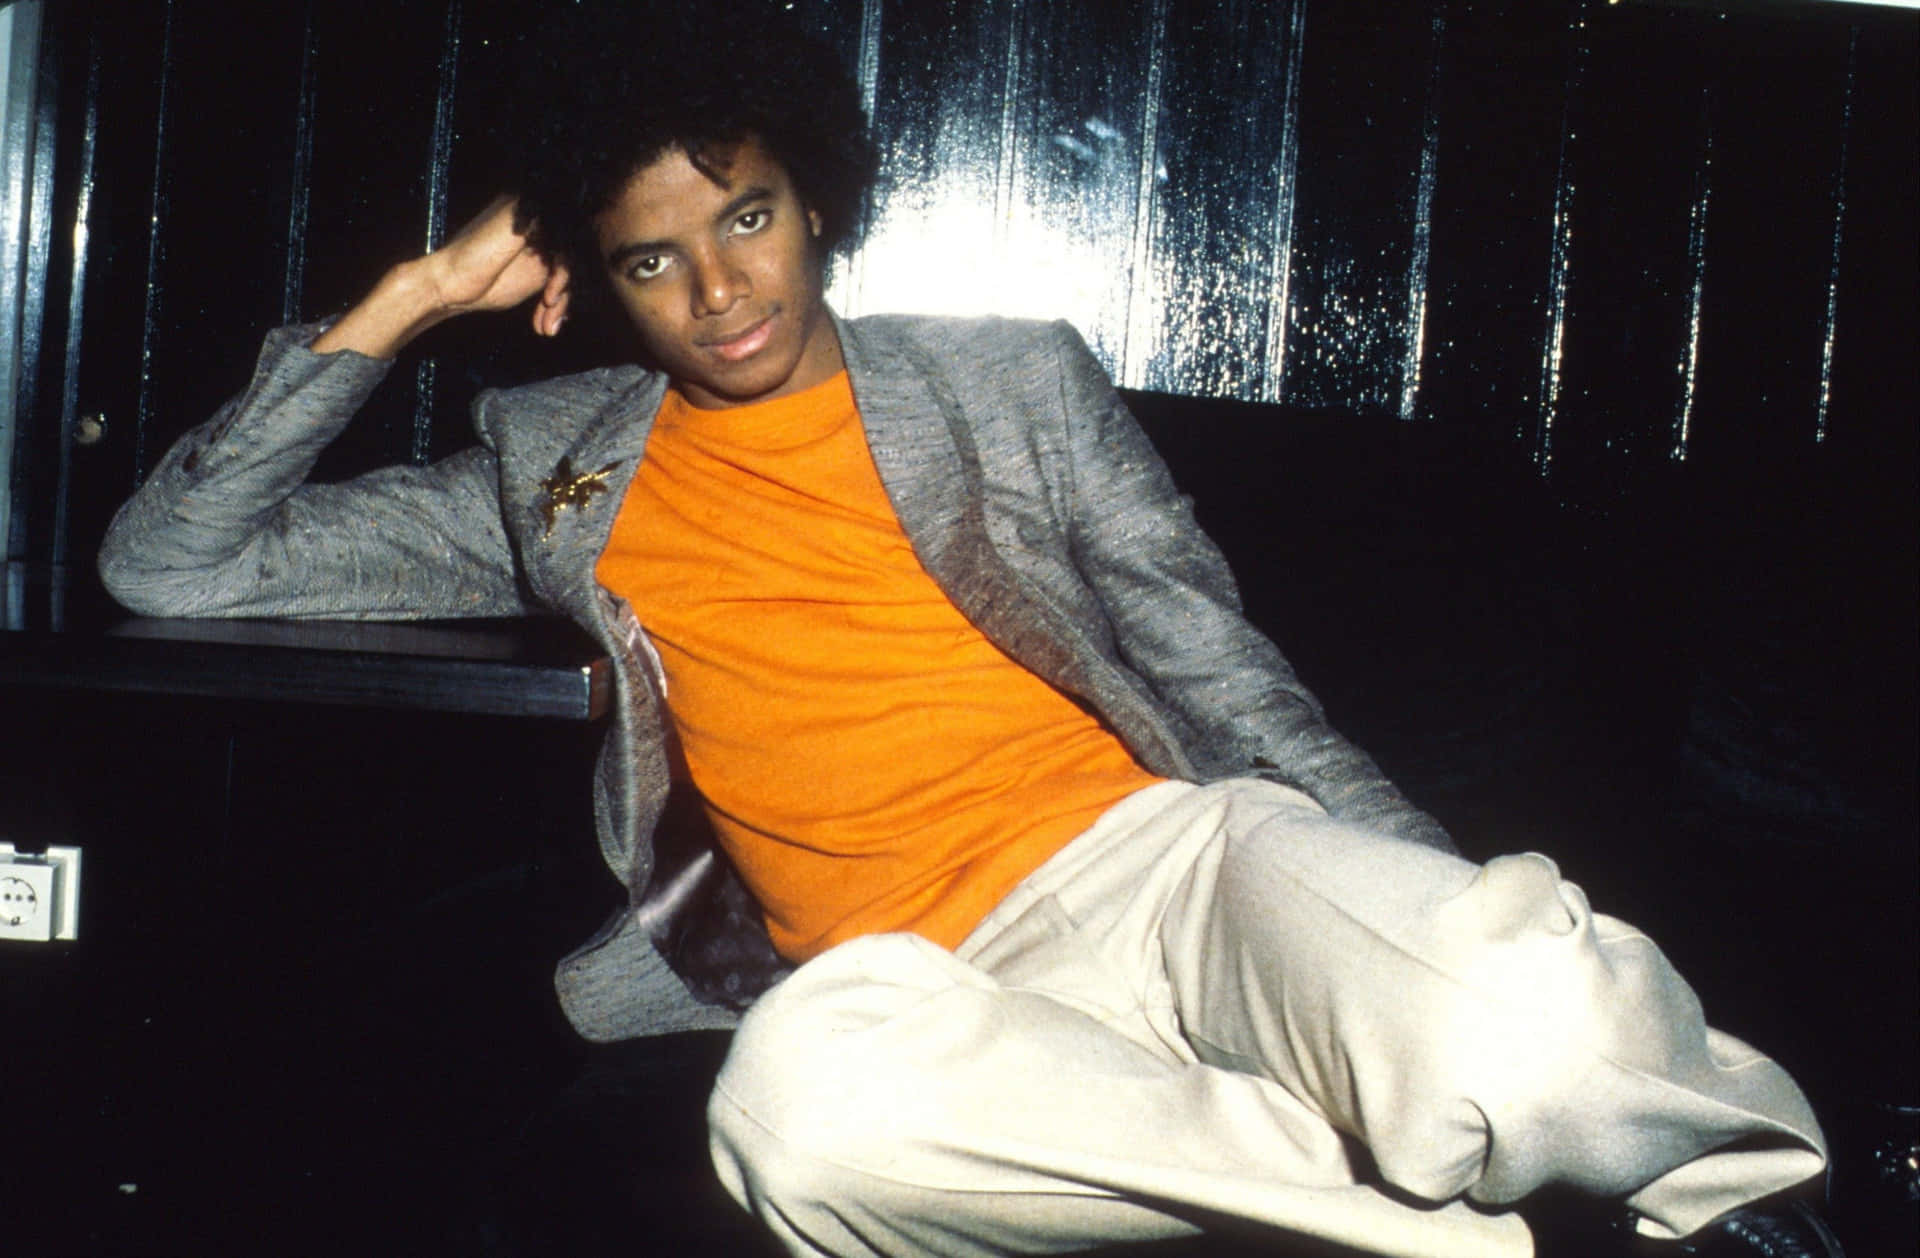 Ungamichael Jackson Med En Lockig Afro. (this Sentence Could Be Used As The Title Of A Computer Or Mobile Wallpaper Featuring A Picture Of Young Michael Jackson With A Curly Afro.)